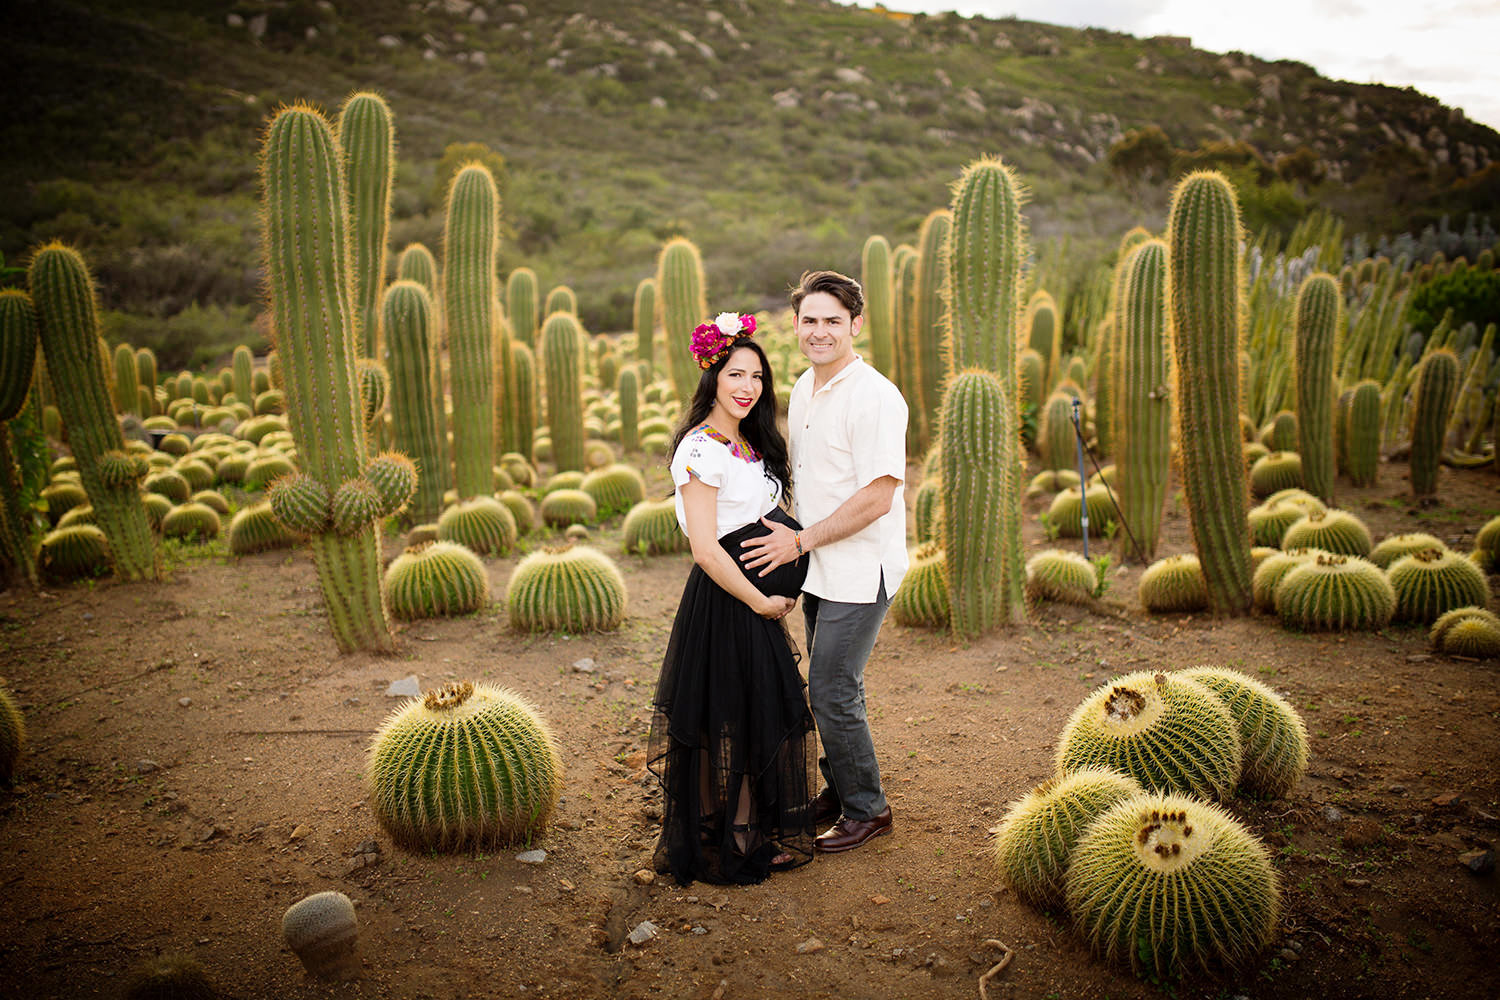 Cactus field Maternity photo in San Diego.